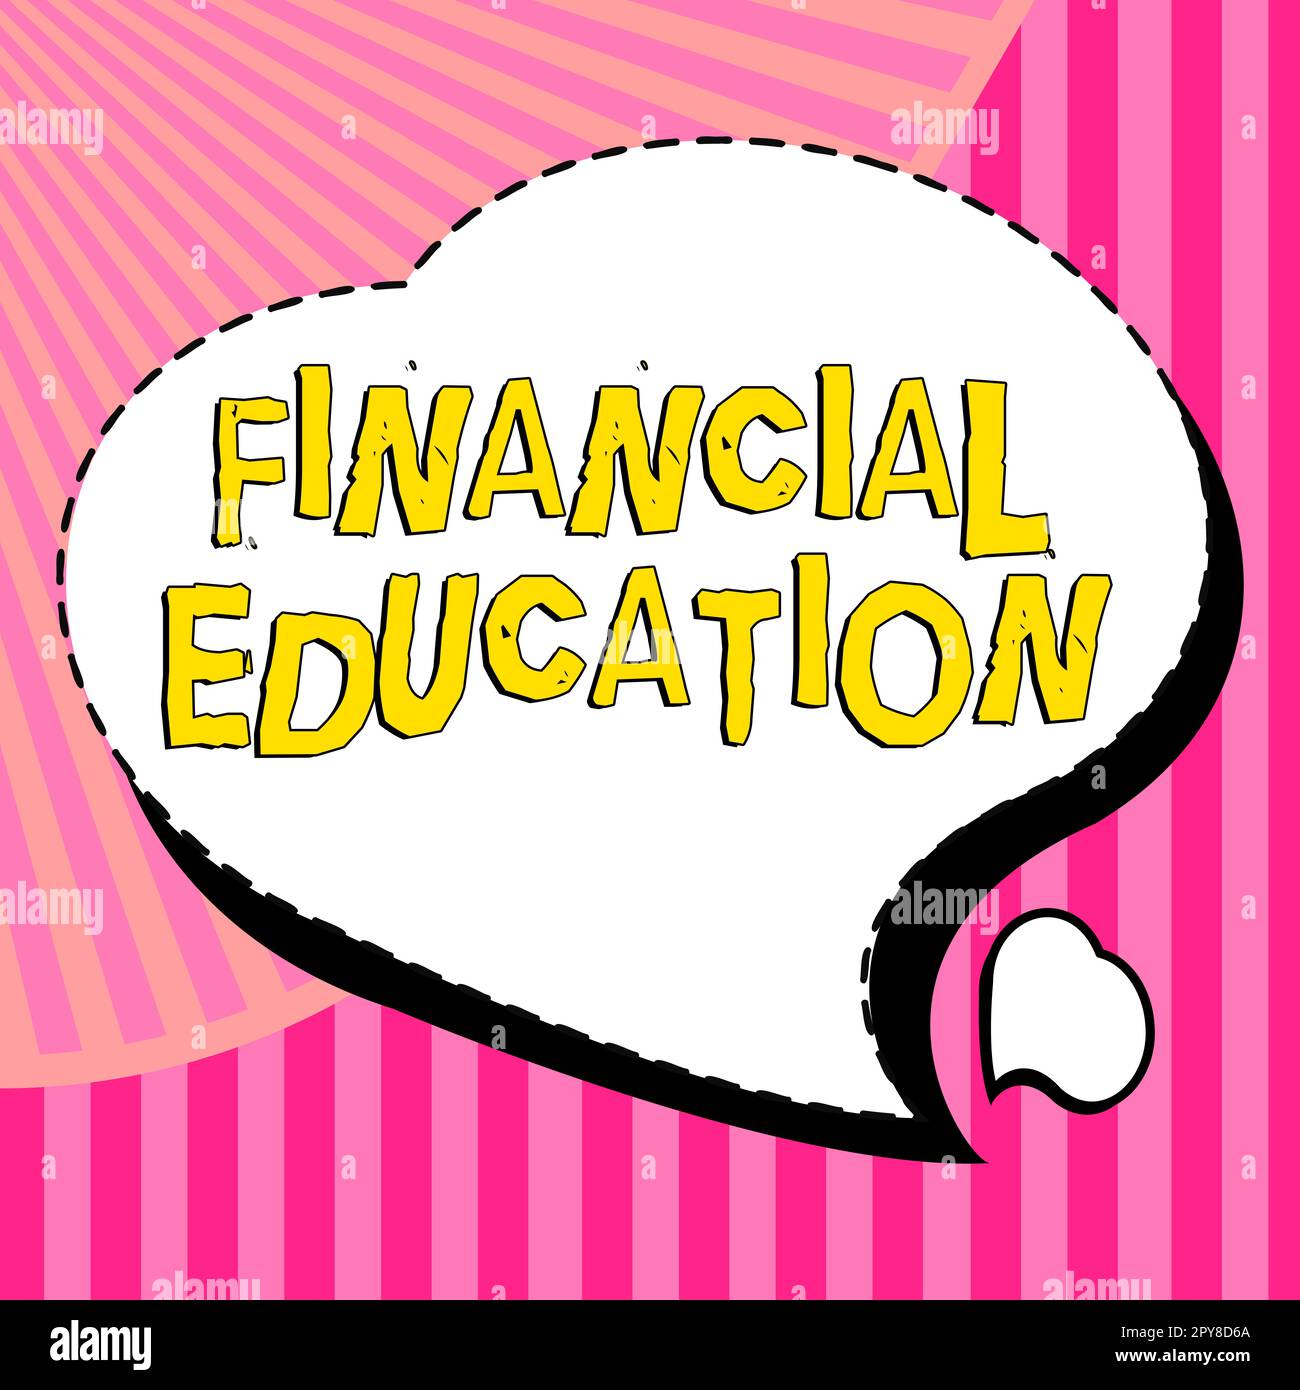 Conceptual display Financial Education. Business showcase Understanding Monetary areas like Finance and Investing Stock Photo